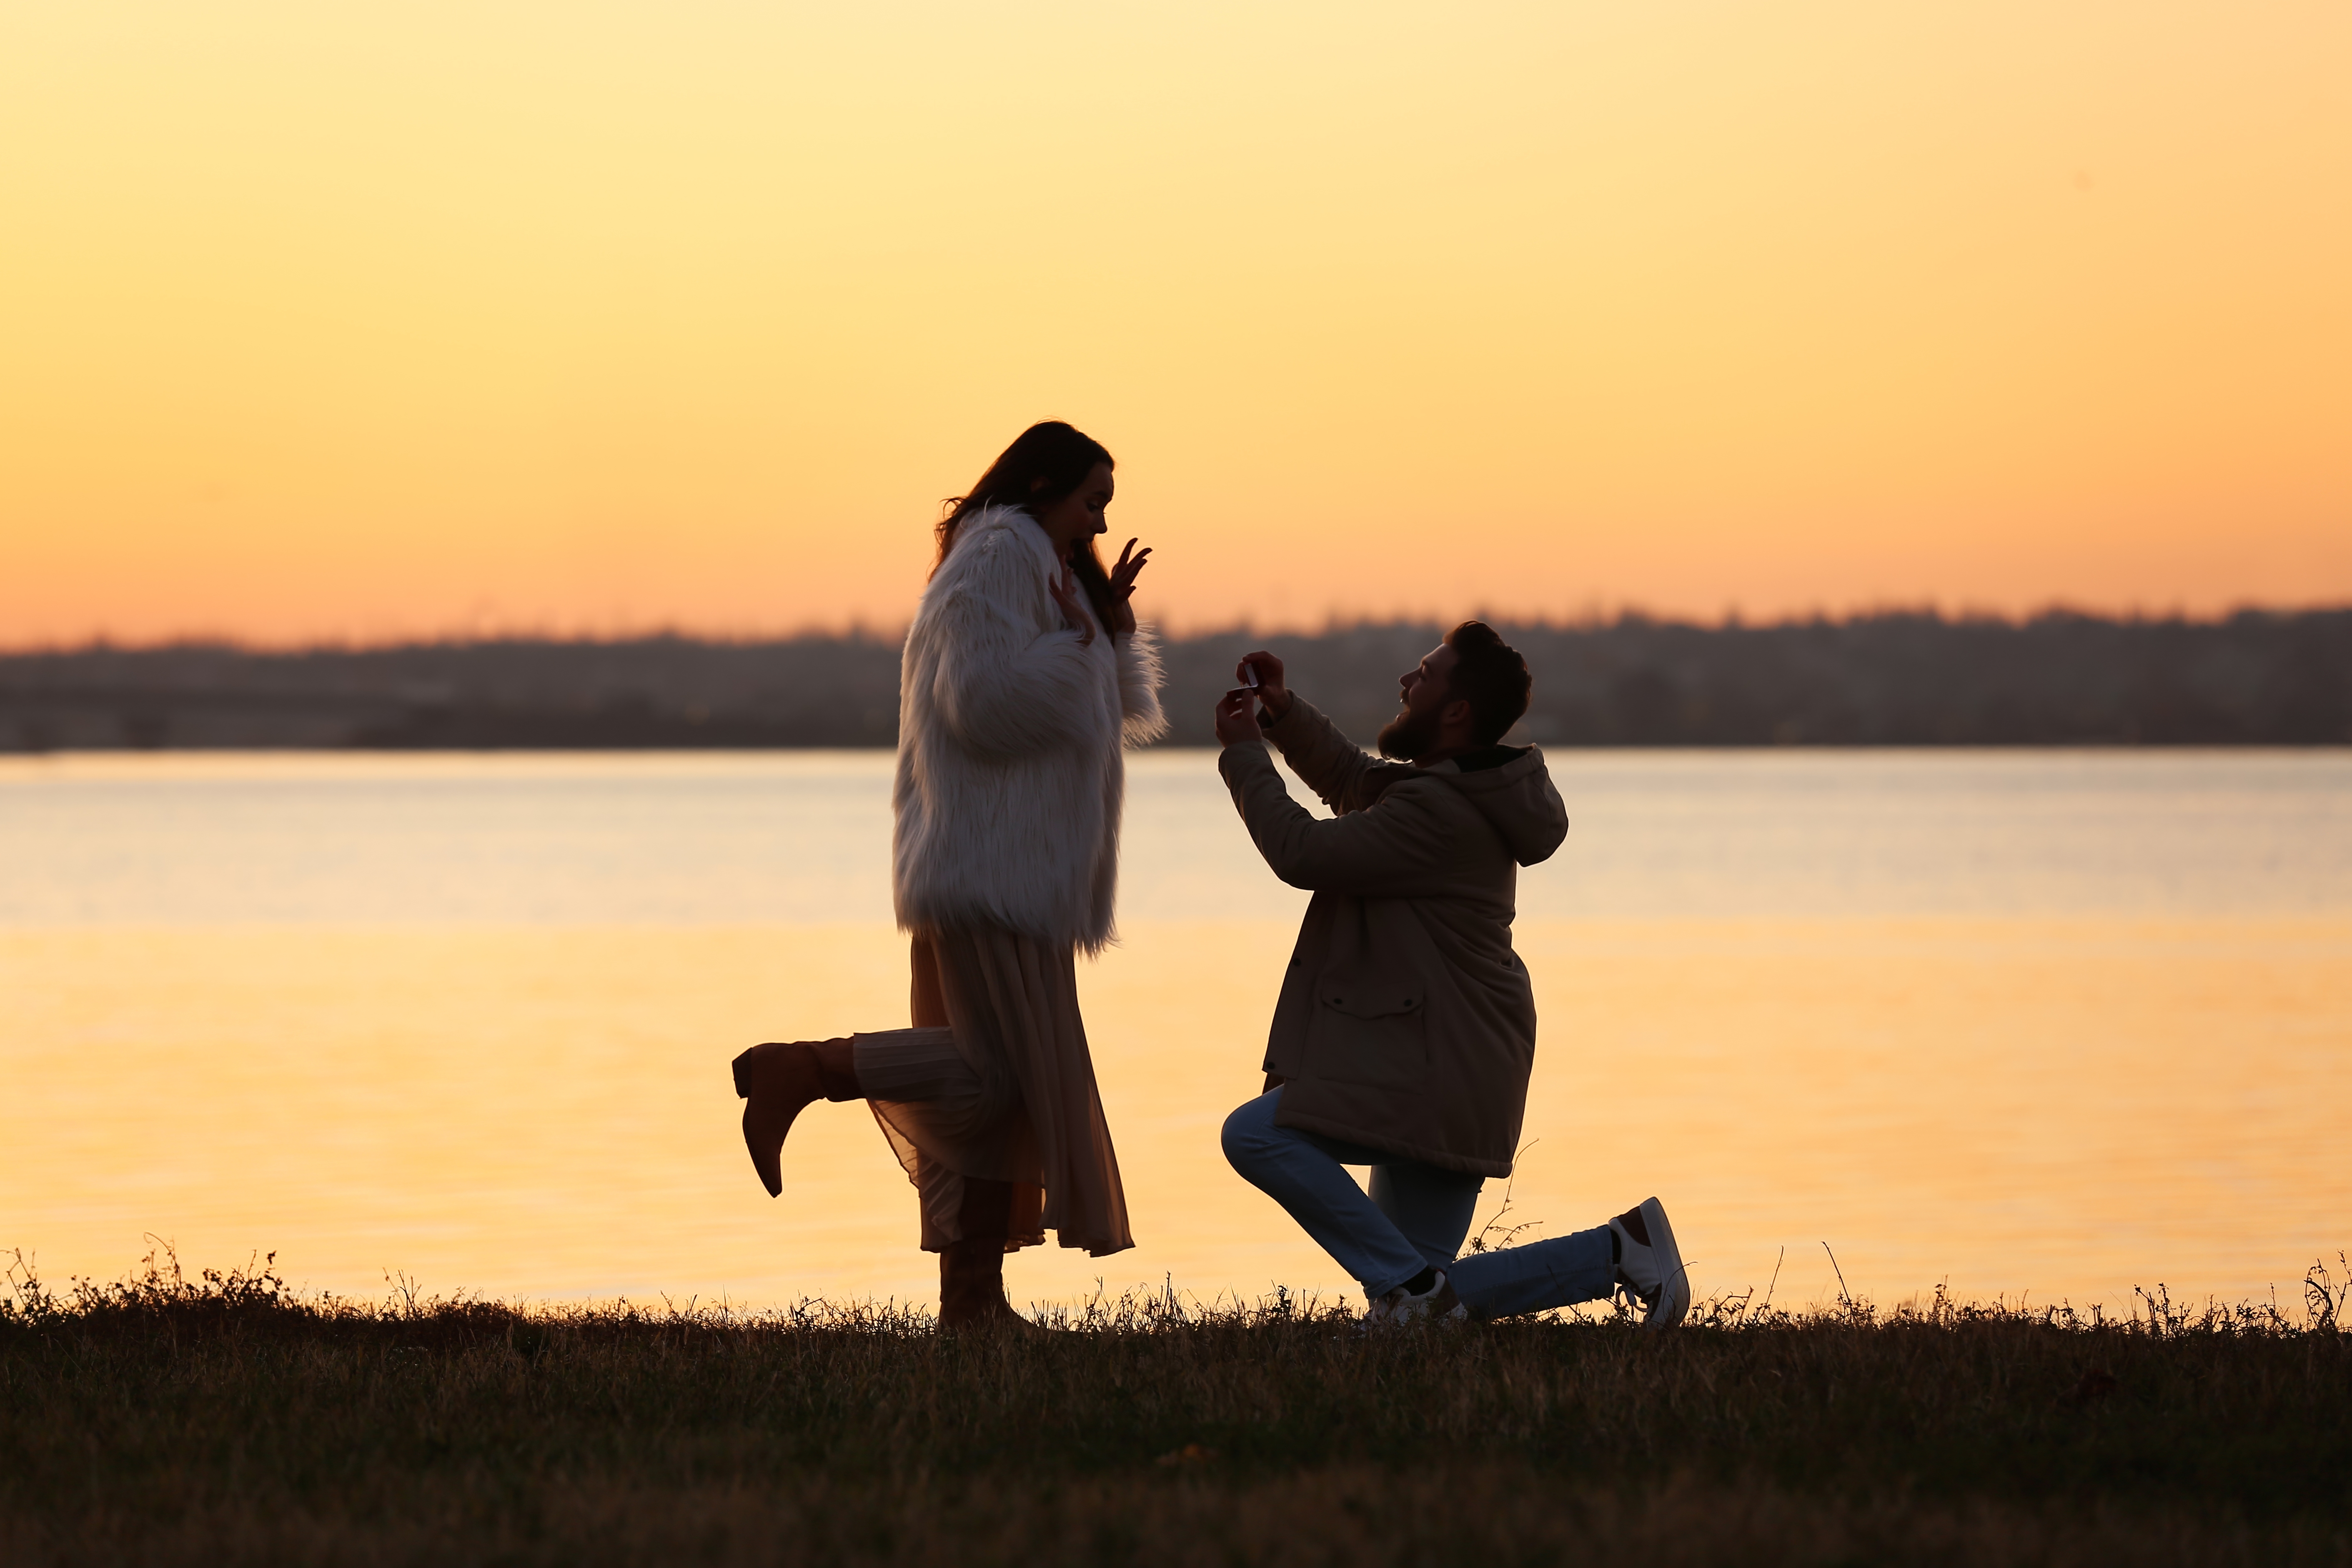 Man proposing to his girlfriend near a river during sunset | Source: Shutterstock